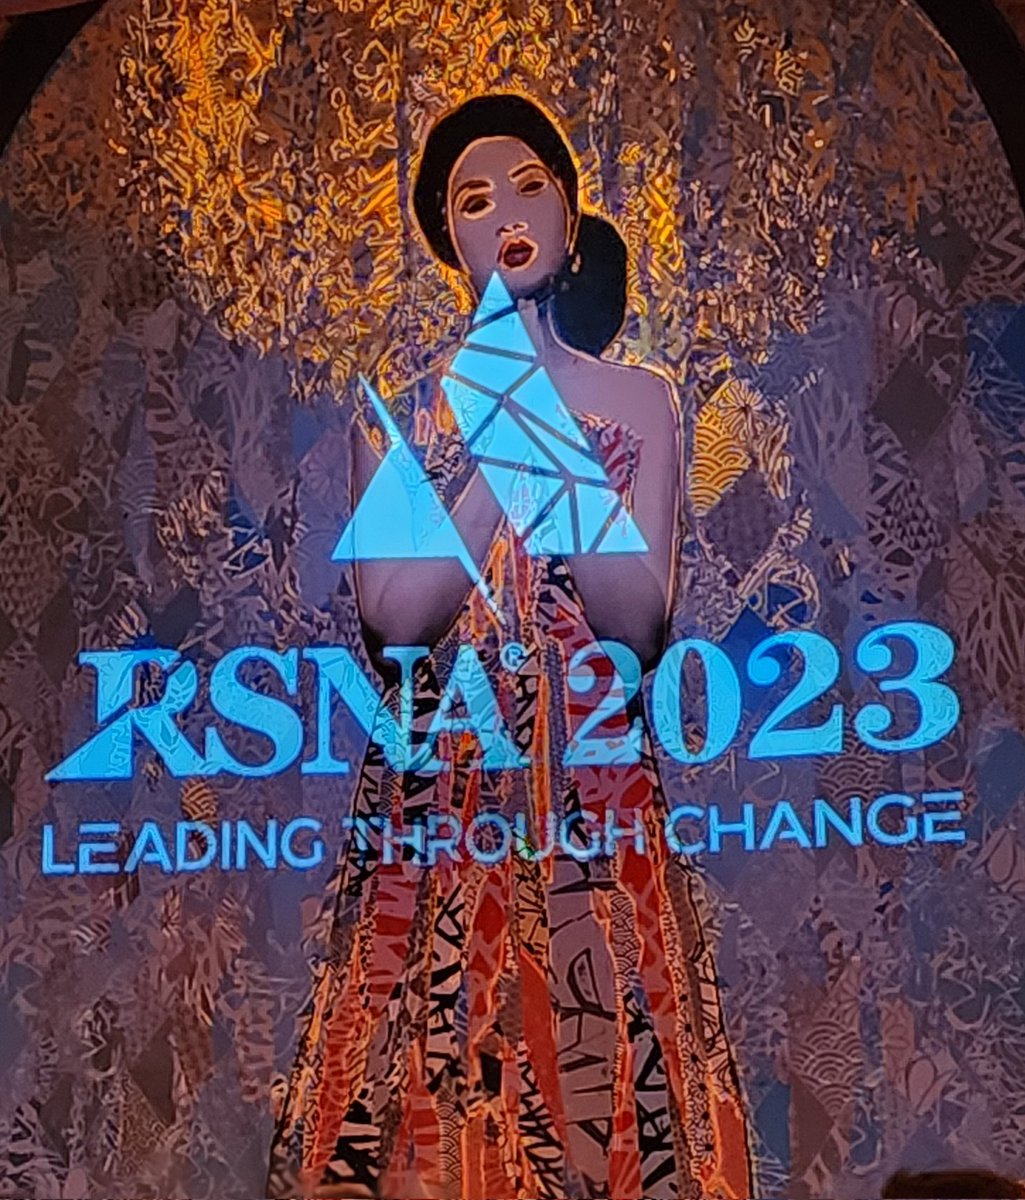 Thanks @RSNA for another fantastic conference! I'm thankful for the chance to connect with friends, mentors, & mentees, and to be inspired by the amazing work of those who always Make Radiology Great! Thanks to those who made #RSNA23 a success. Already looking forward to #RSNA24.